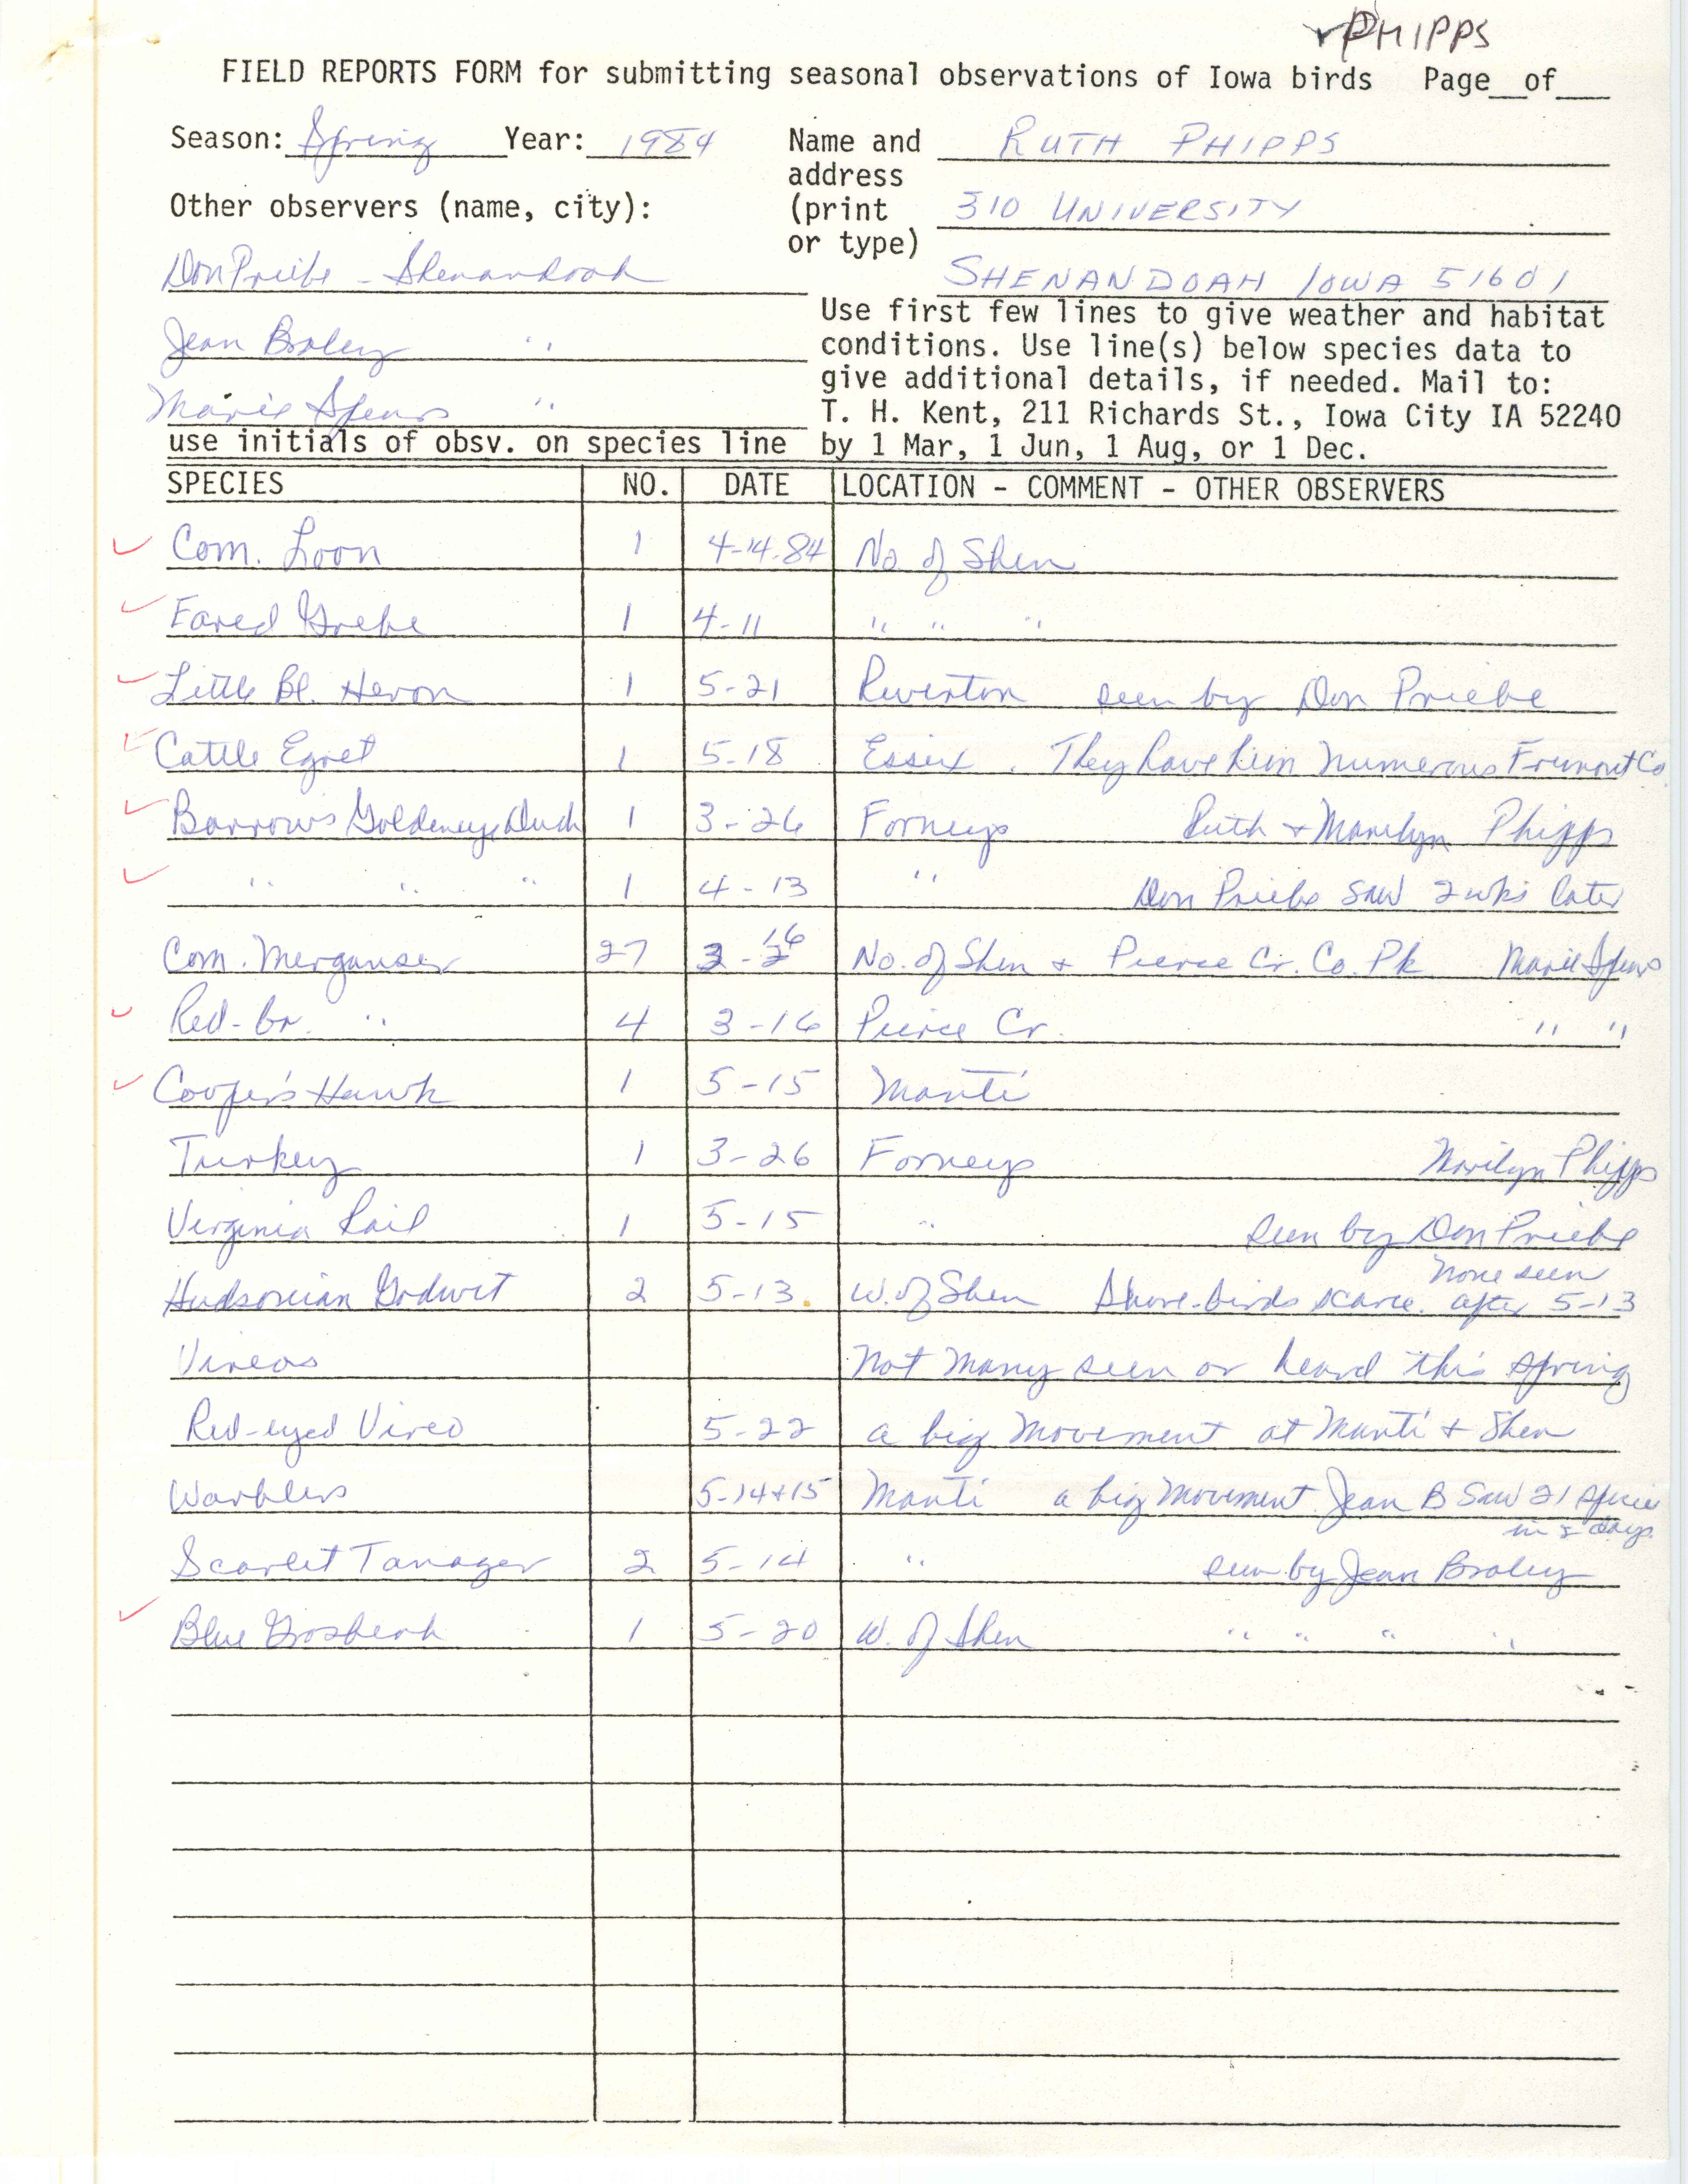 Field notes contributed by Ruth Phipps, Shenandoah, Iowa, spring 1984